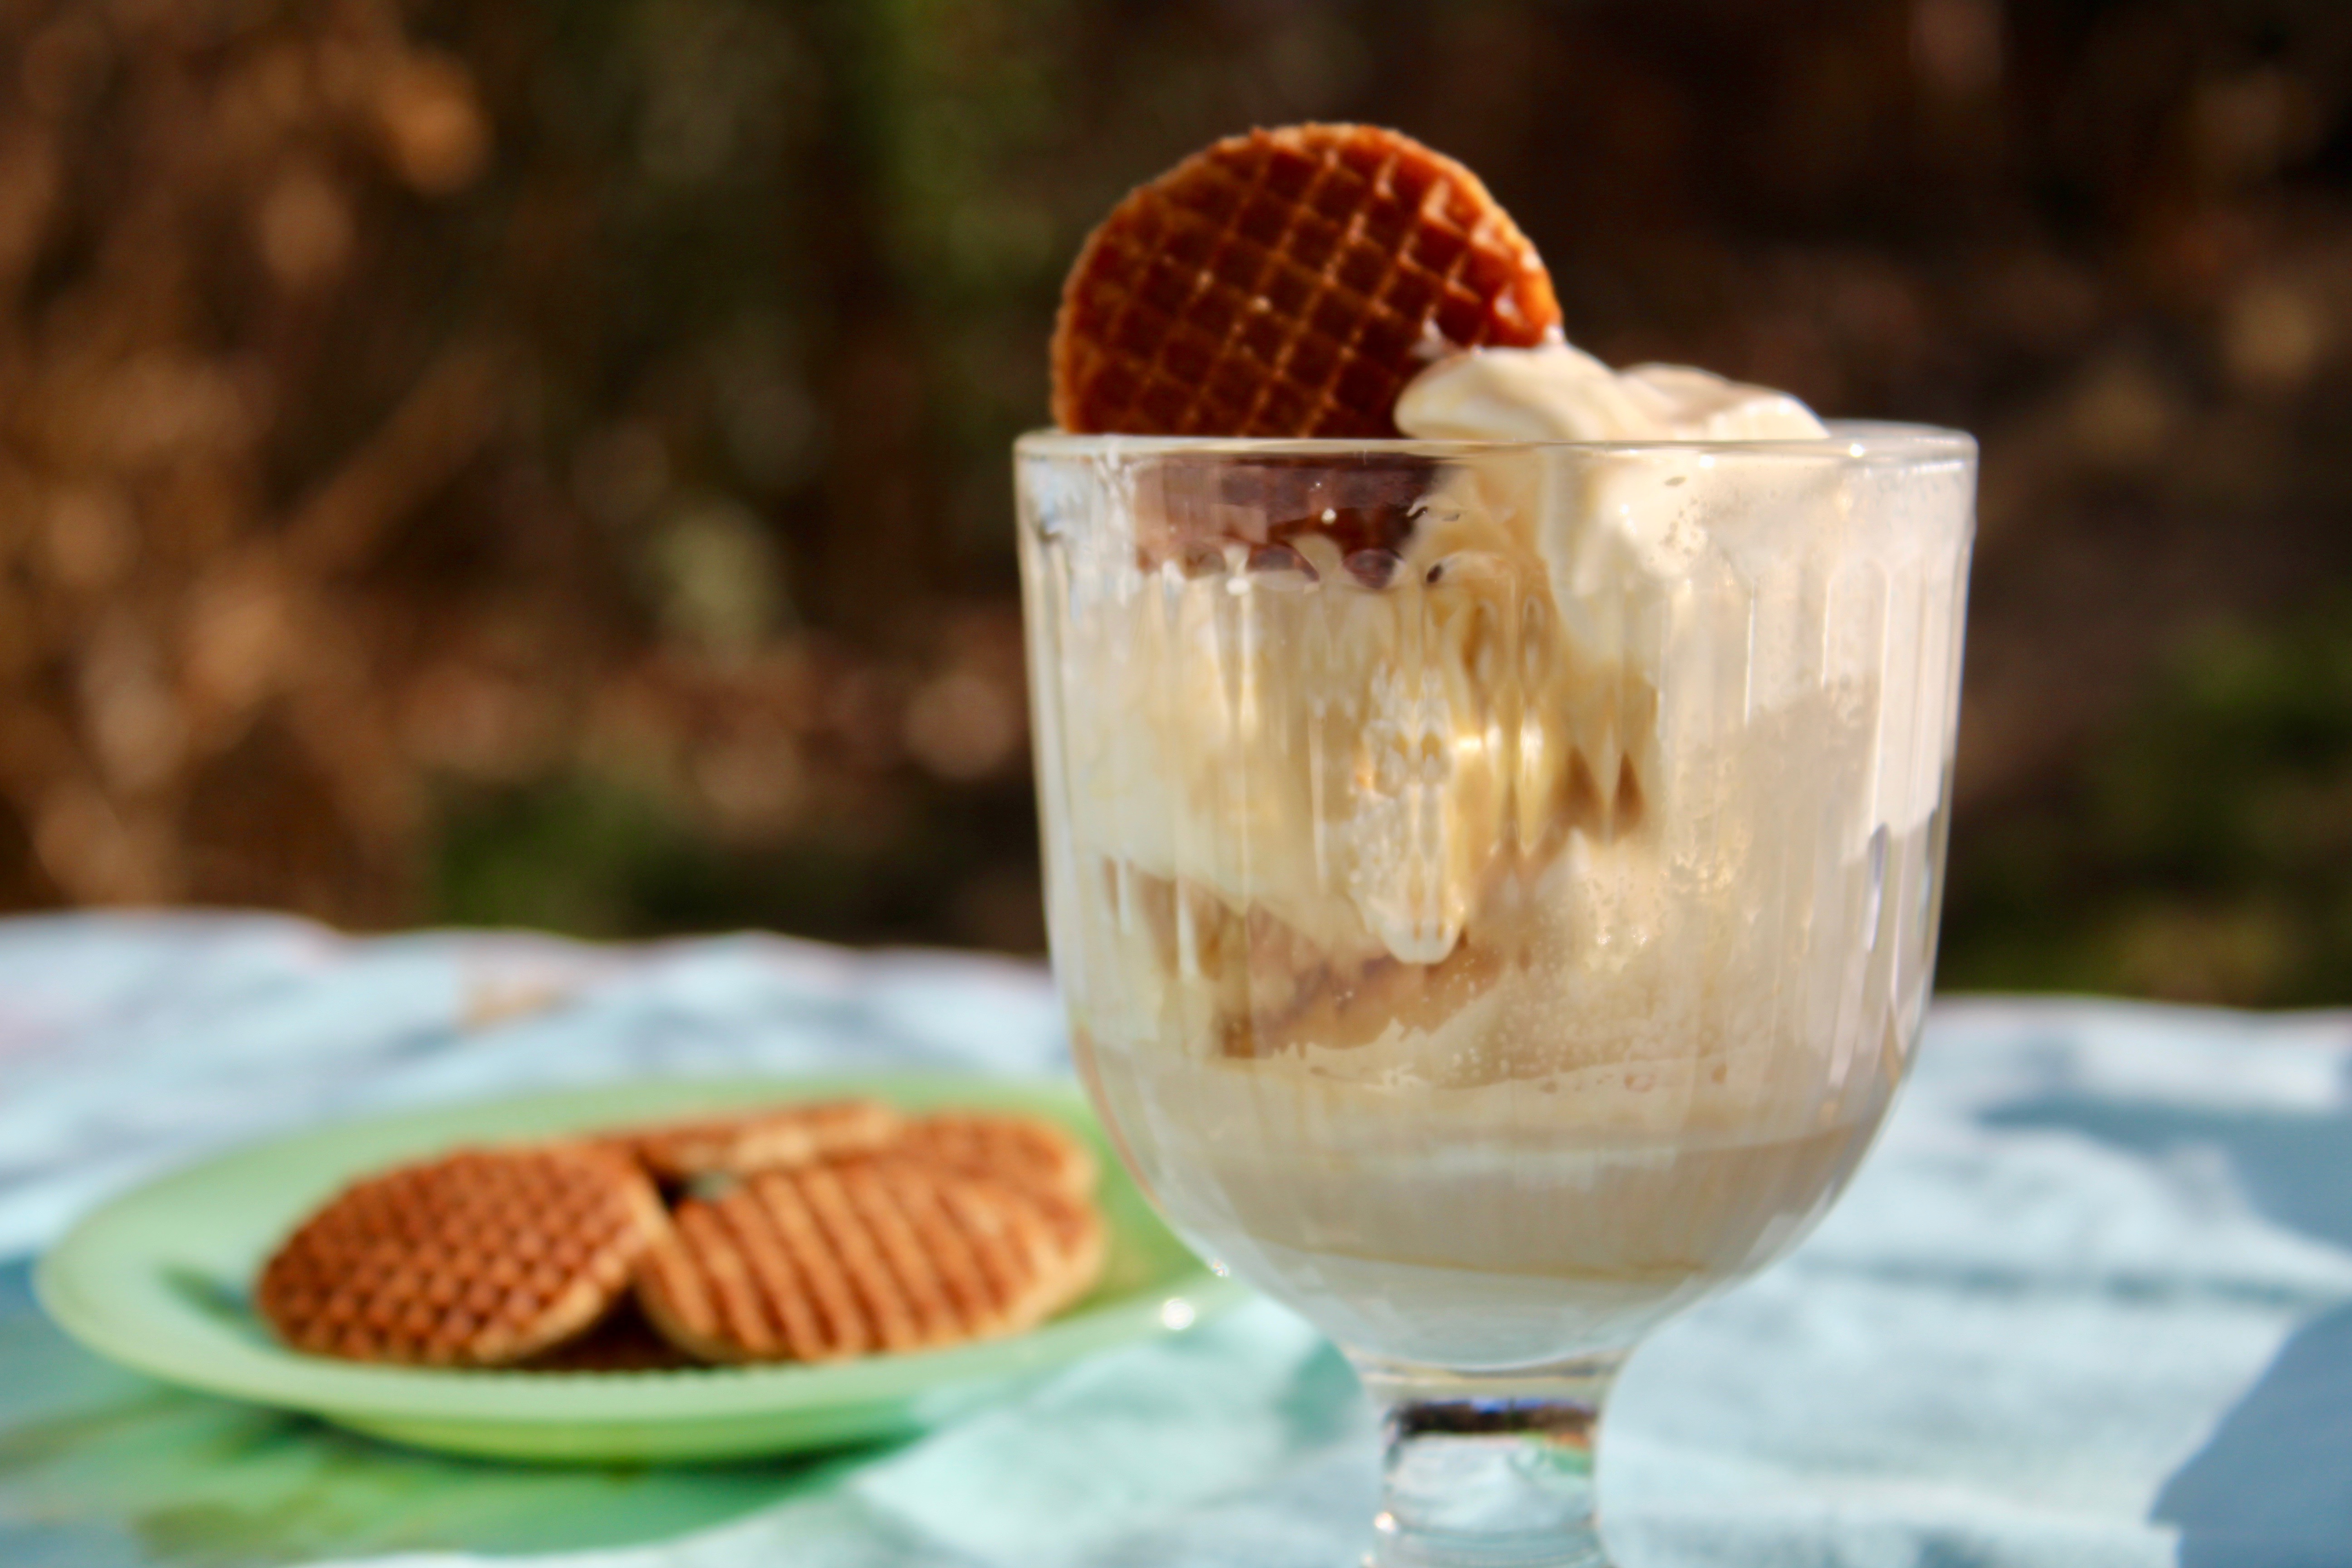 If you can scoop ice cream you can make the stroopwaffogato.